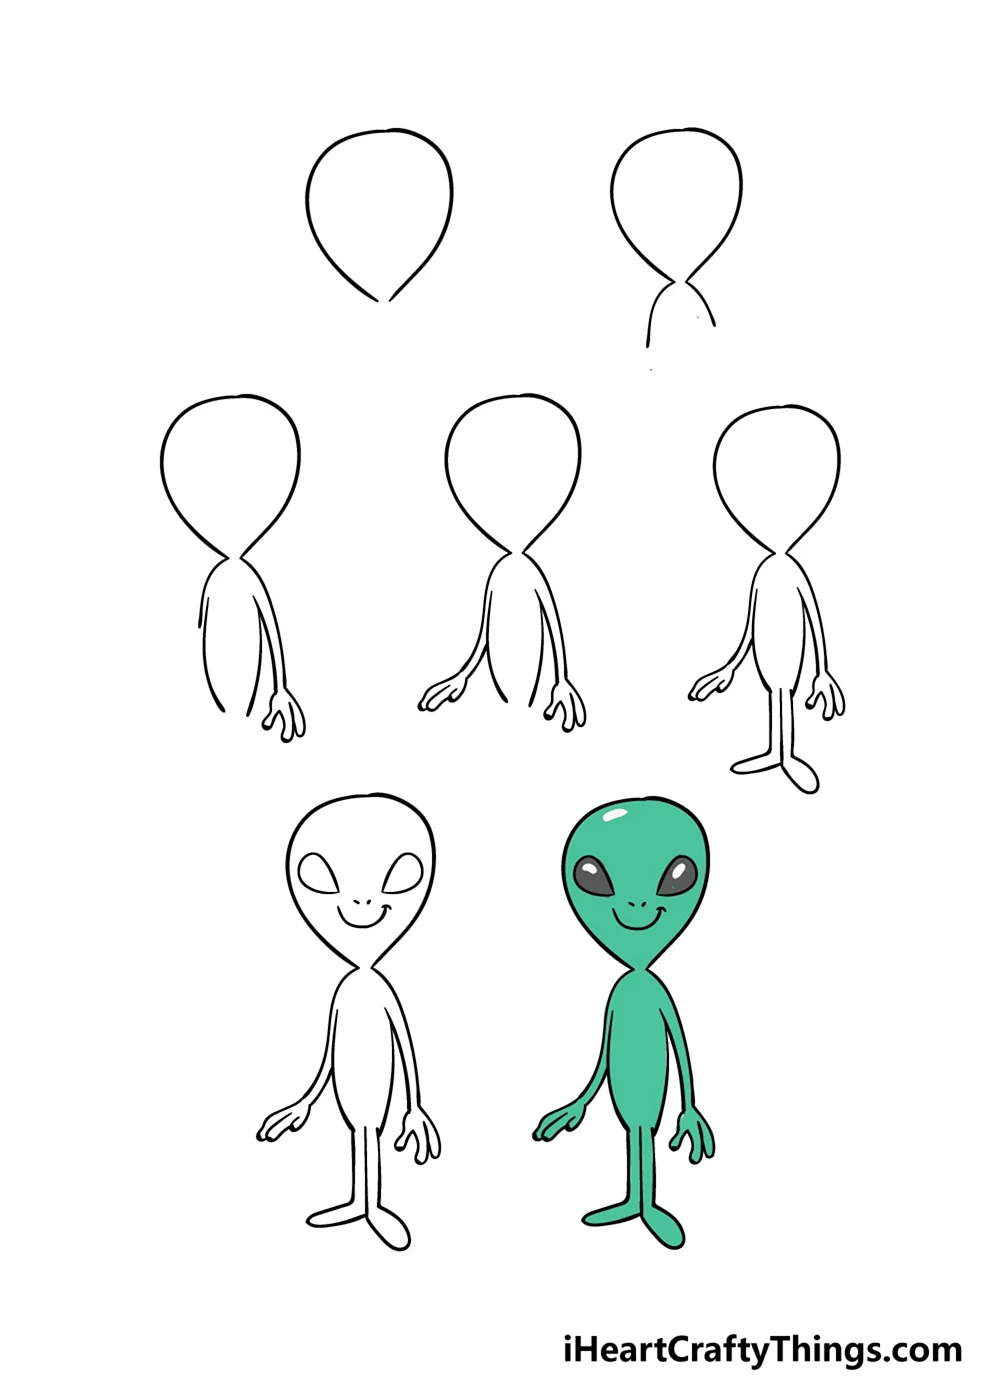 How to draw Alien